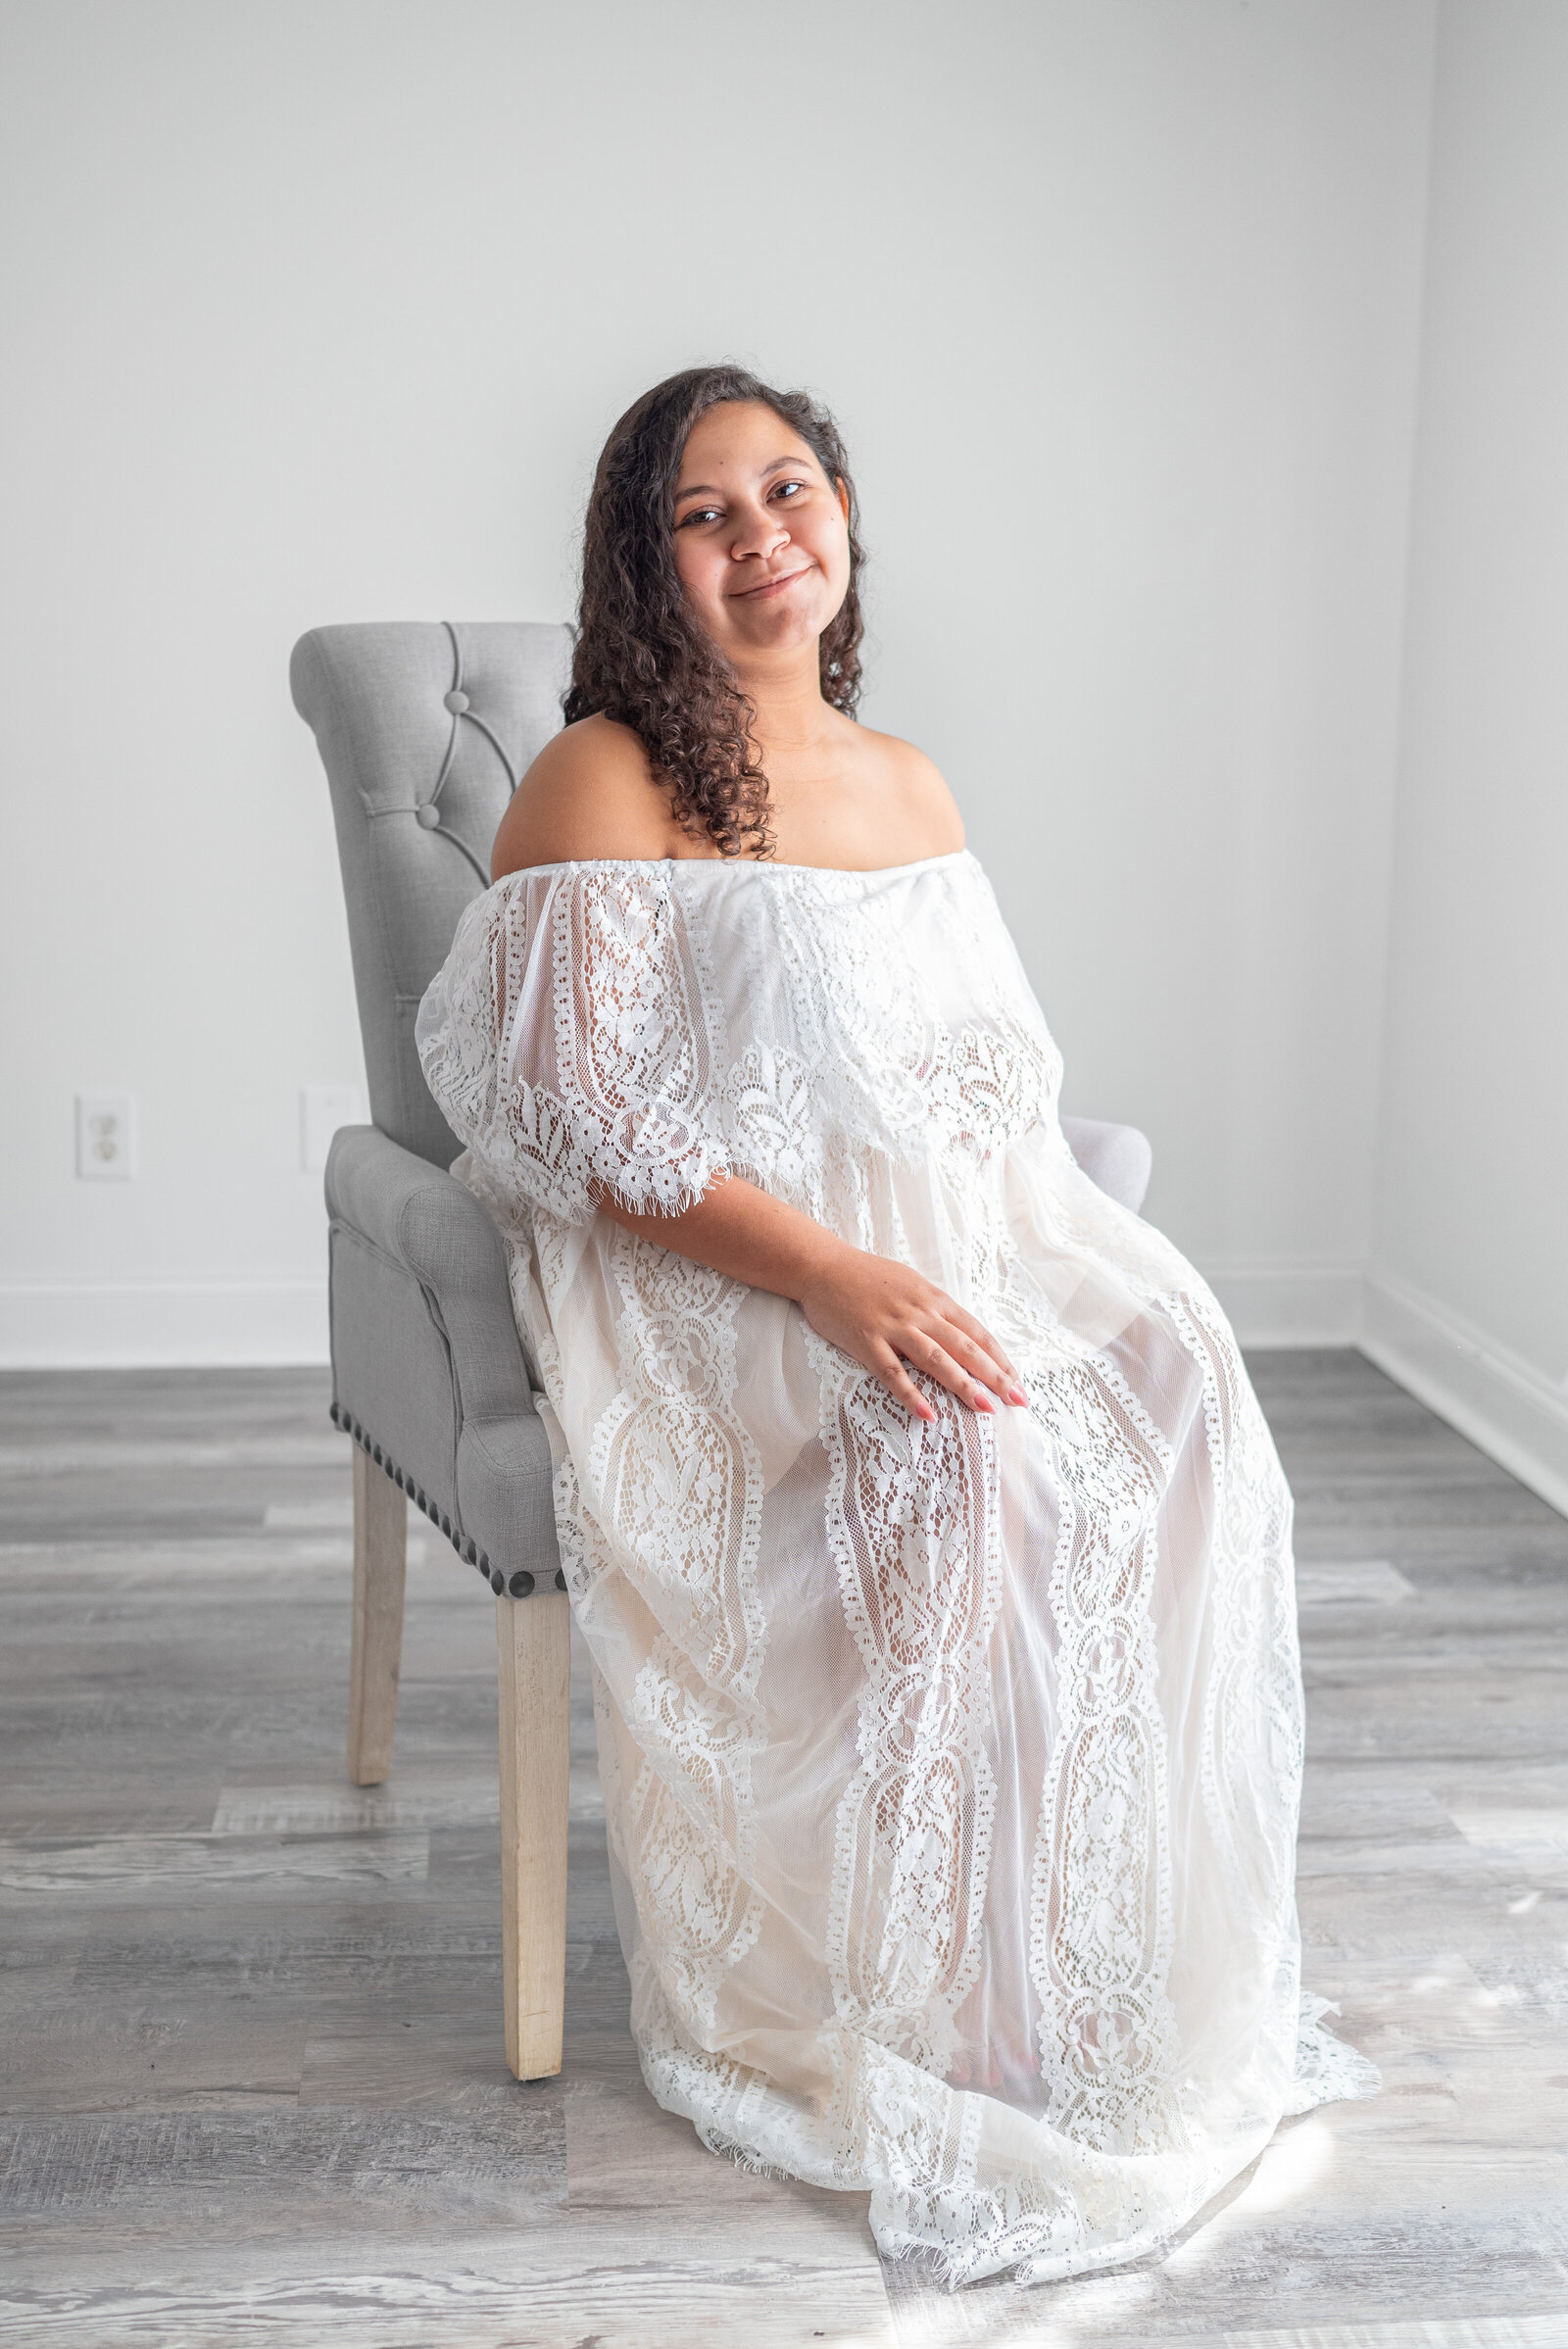 Pregnant woman sitting in a chair and posing for her maternity photos in  a Huntsville Alabama studio